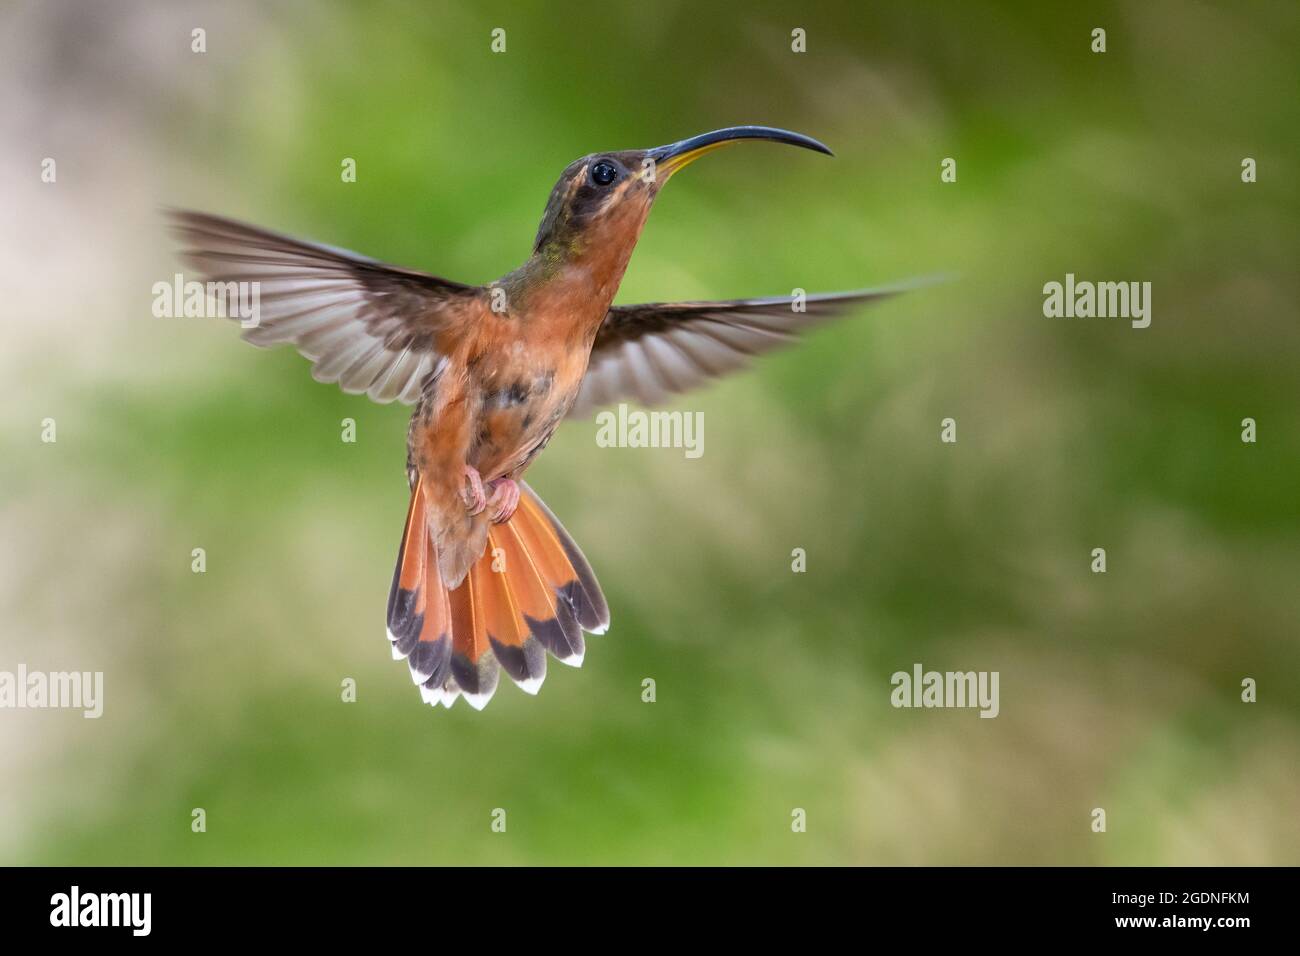 A Rufous-breasted Hermit hummingbird (Glaucis hirsutus) hovering in the air with a blurred green background. Tropical bird in garden. Stock Photo